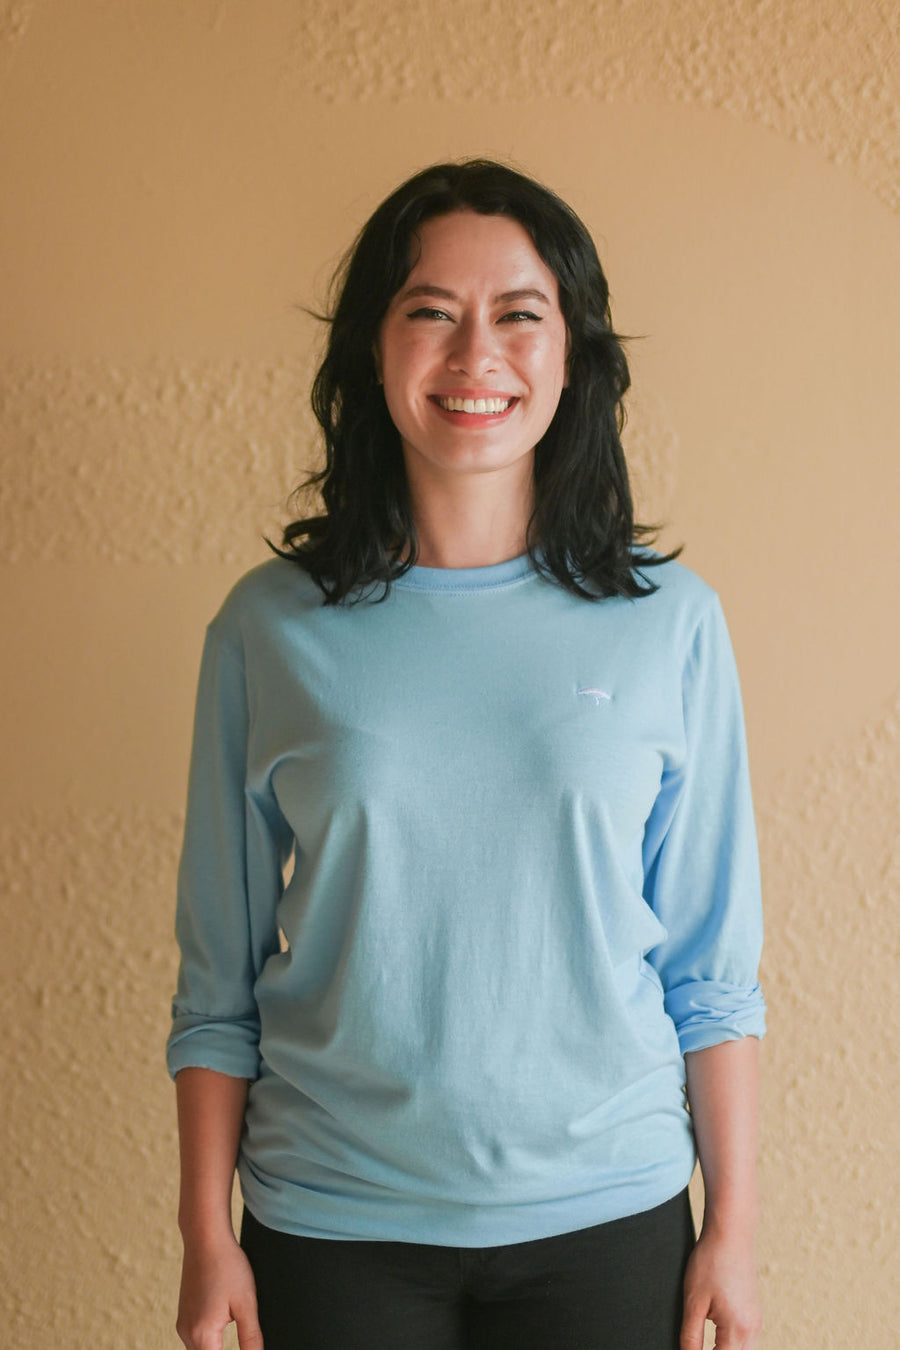 Light blue recycled unisex long sleeve shirt with small white Ungalli tree on front